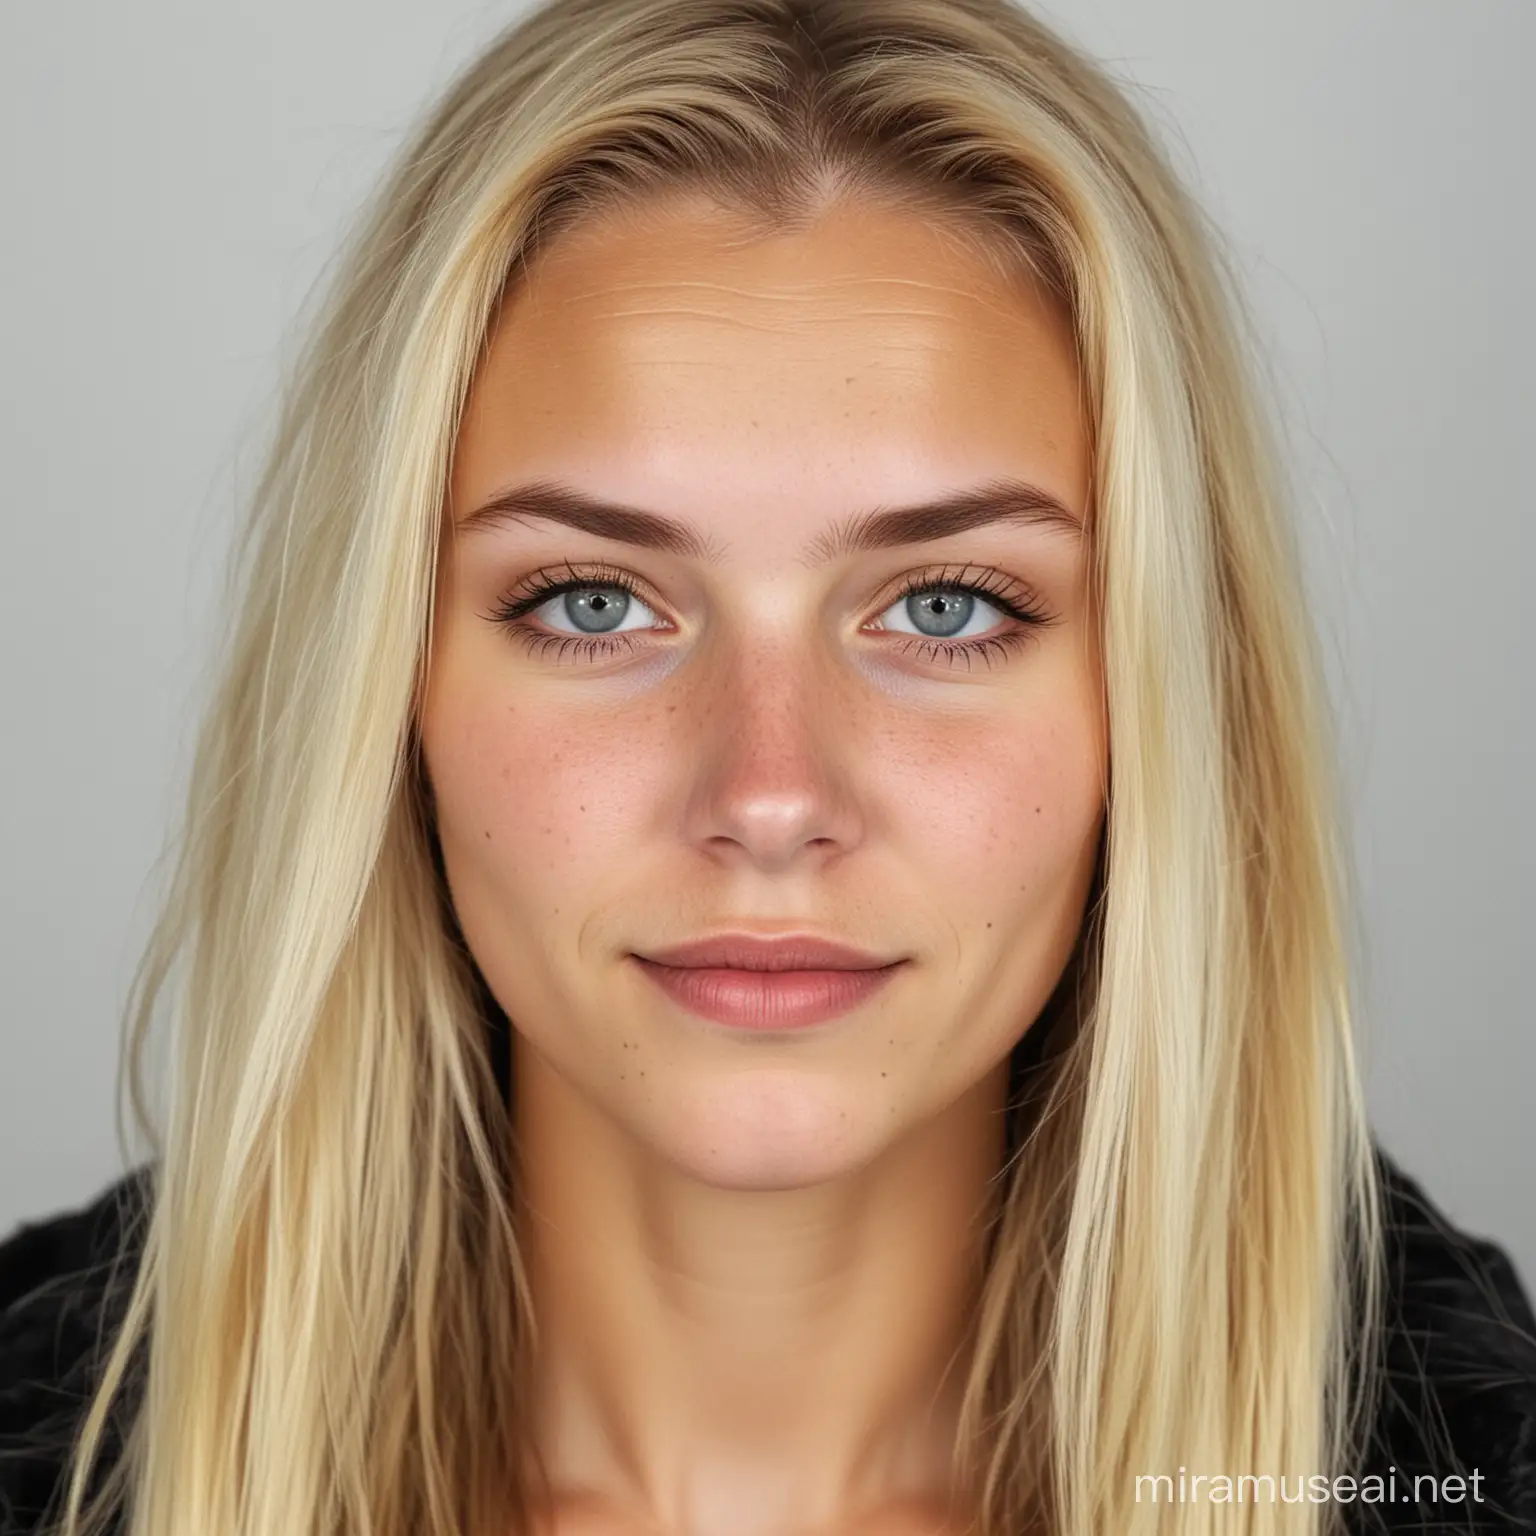 A 22 year old nordic woman